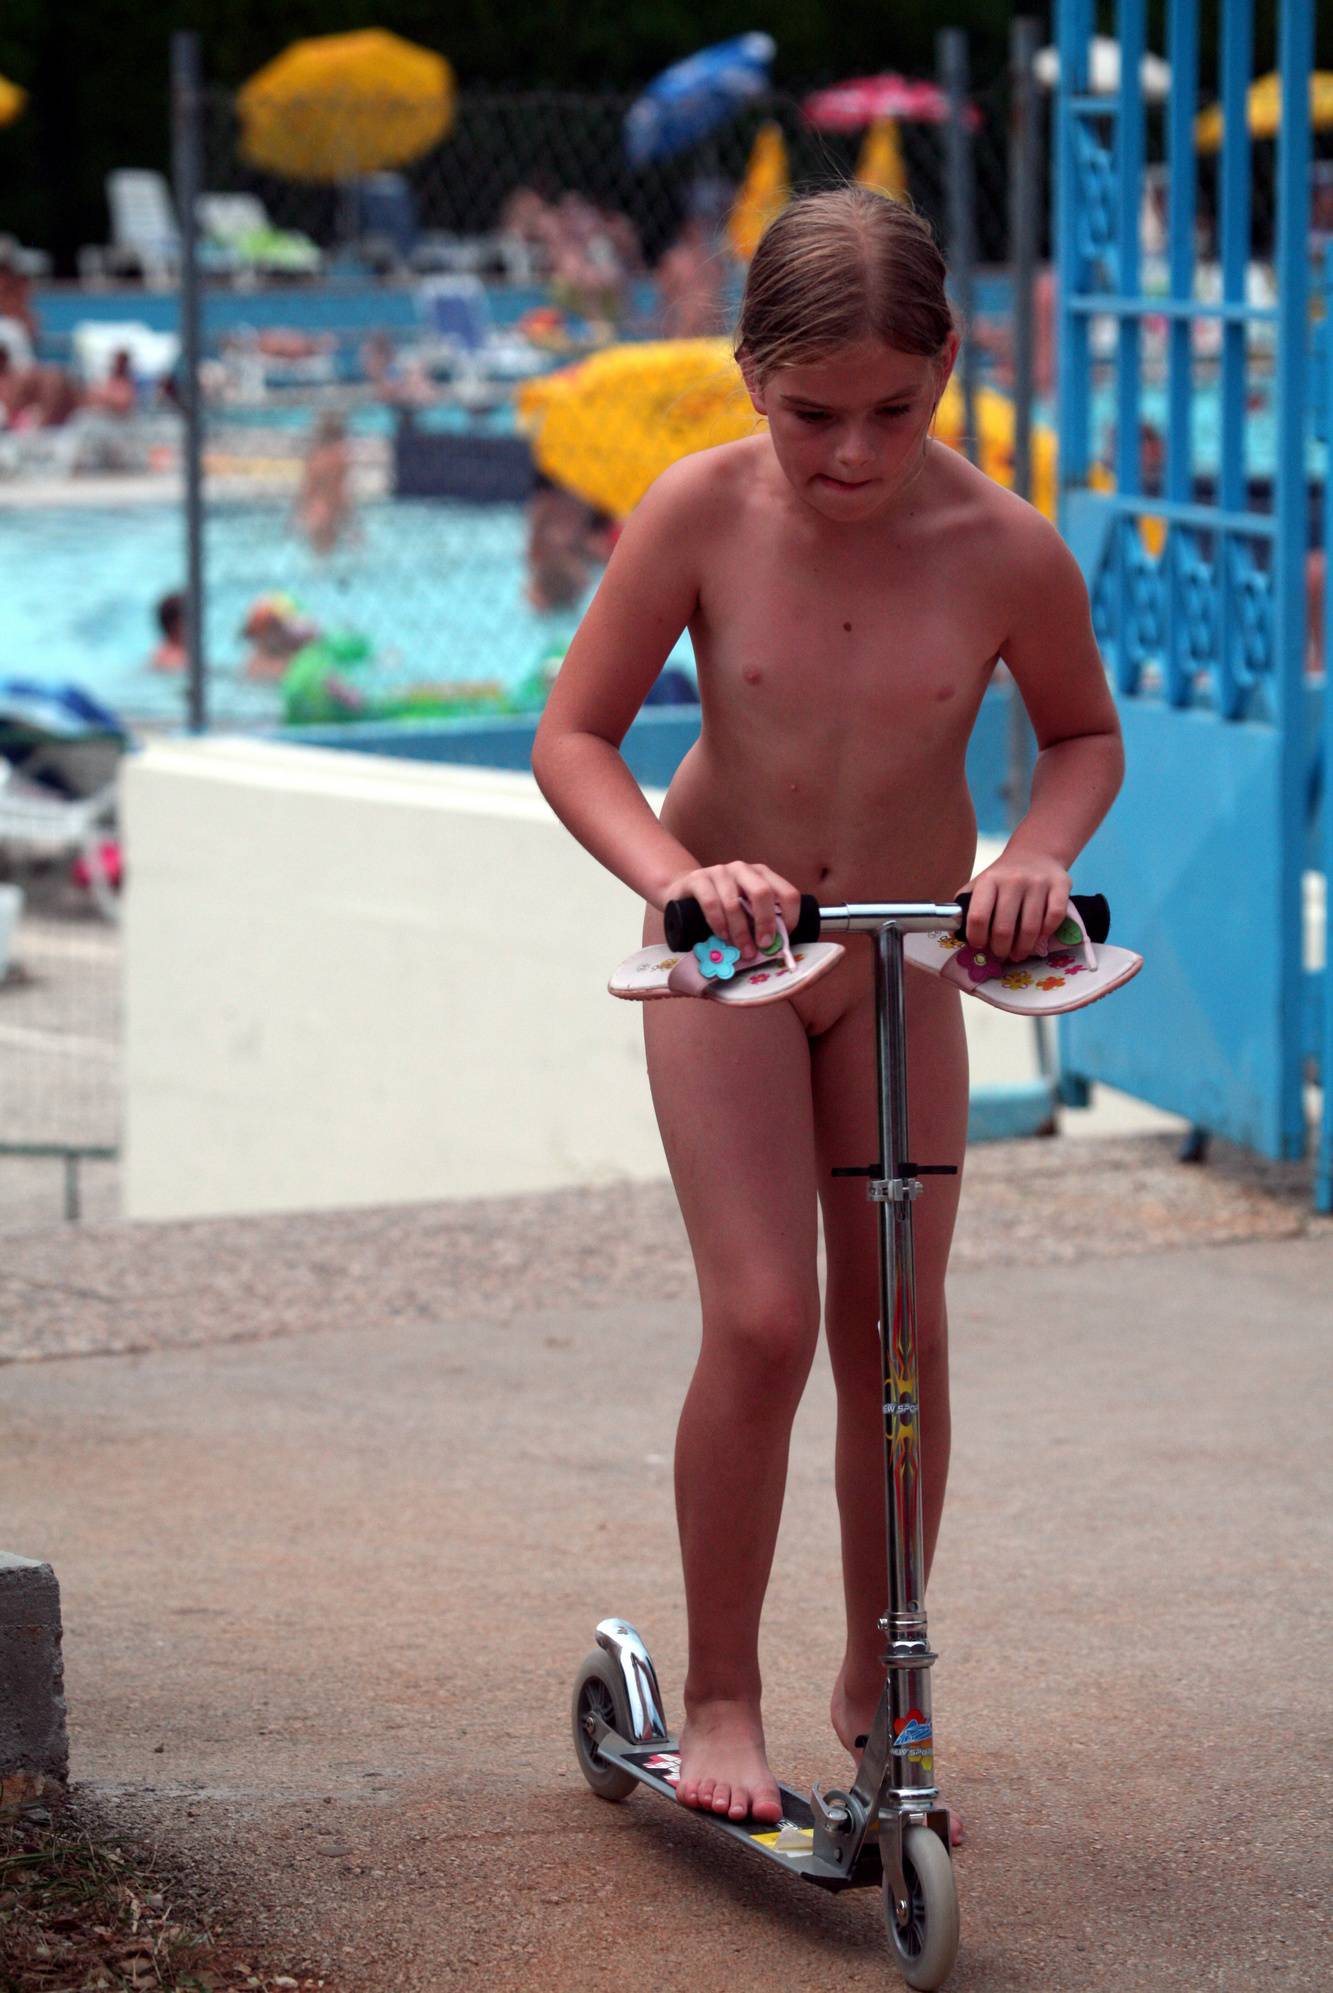 Pool-Side Naturist Scooter - 3